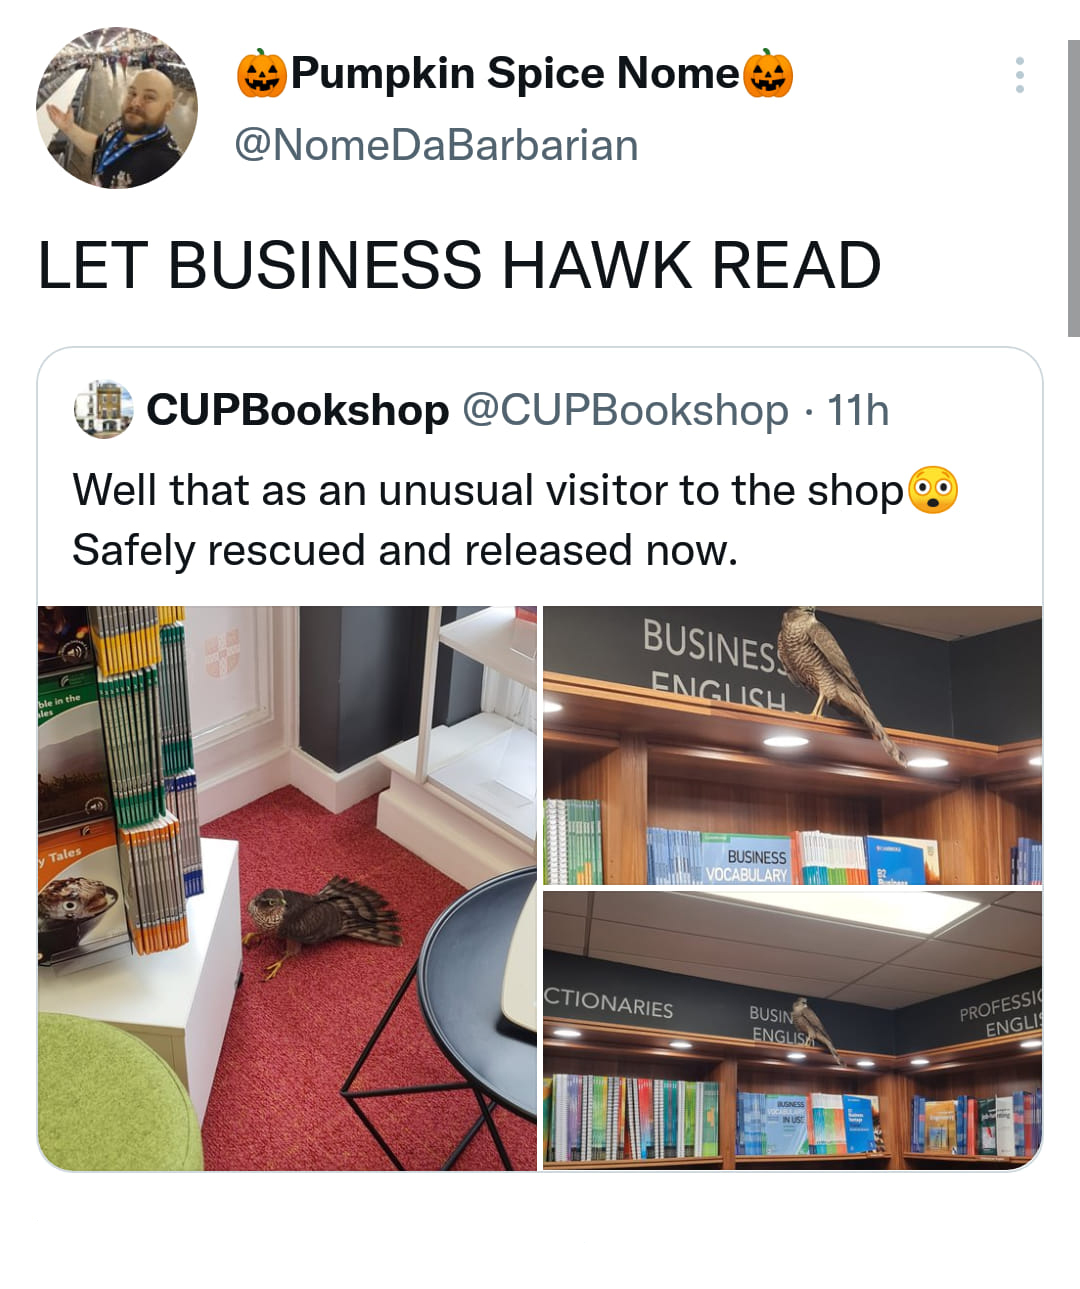 table - Pumpkin Spice Nome Let Business Hawk Read CUPBookshop . 11h Well that as an unusual visitor to the shop Safely rescued and released now. Busines English Ctionaries Sydd Poves Engli